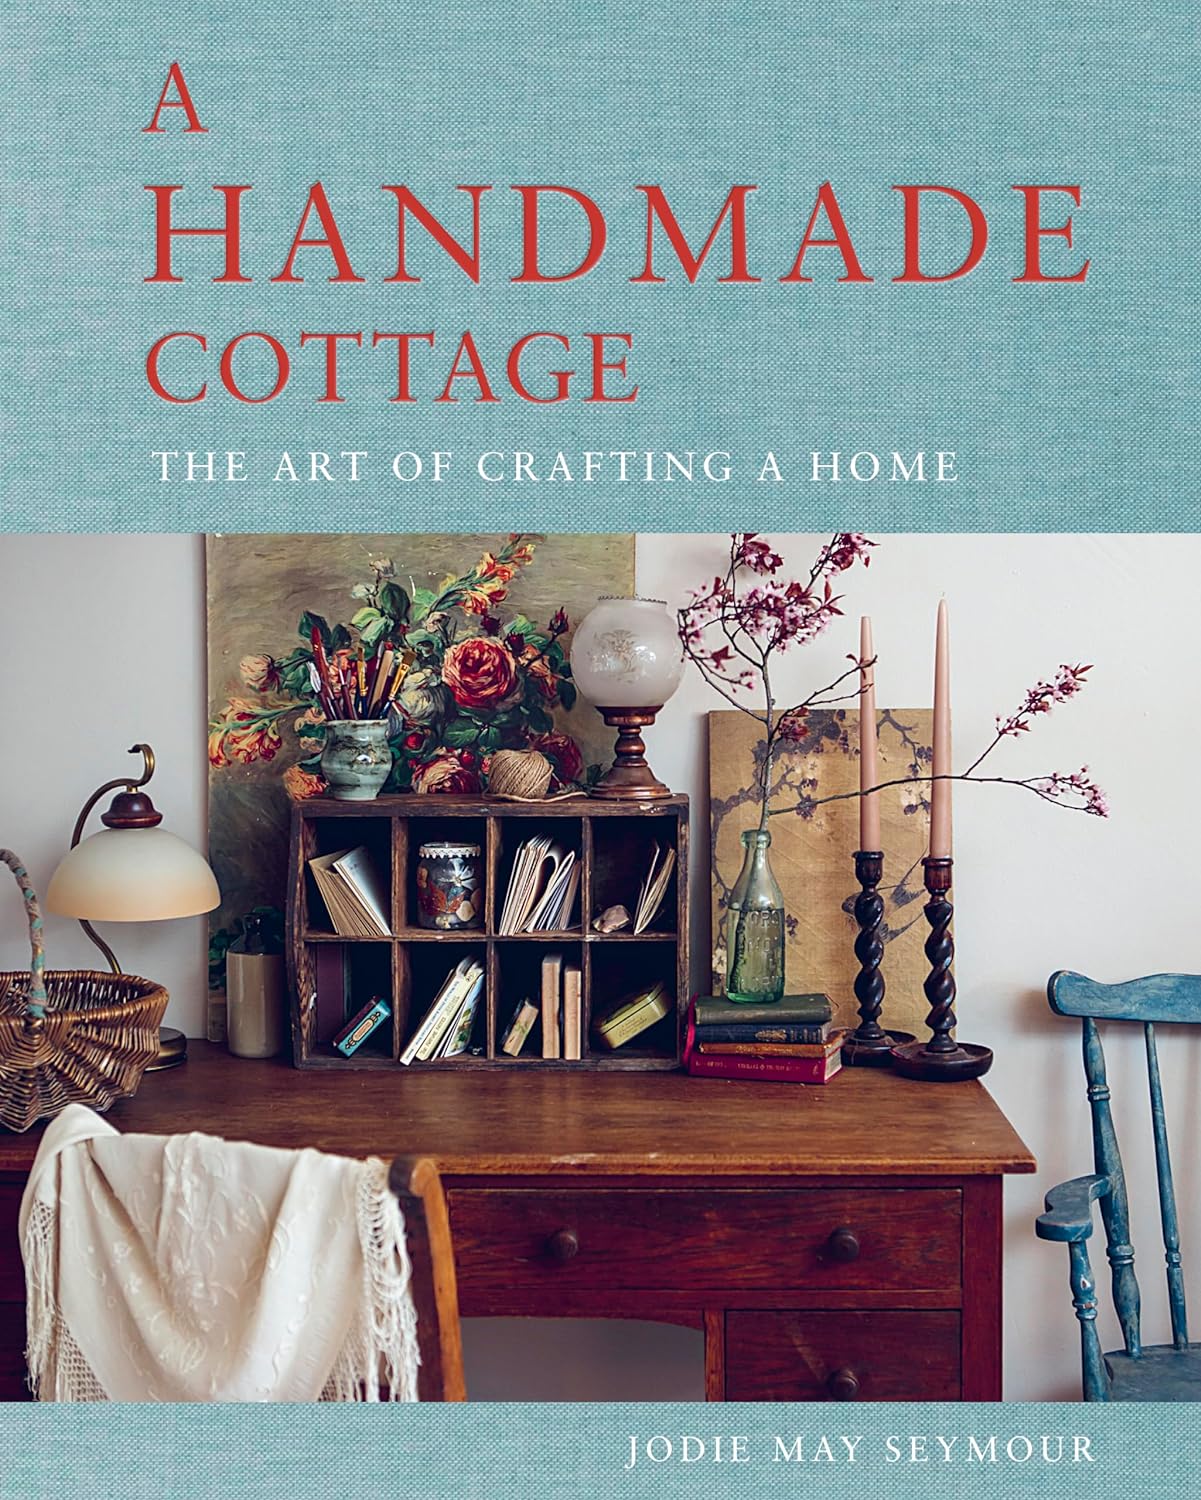 Handmade Cottage: The Art of Crafting a Home